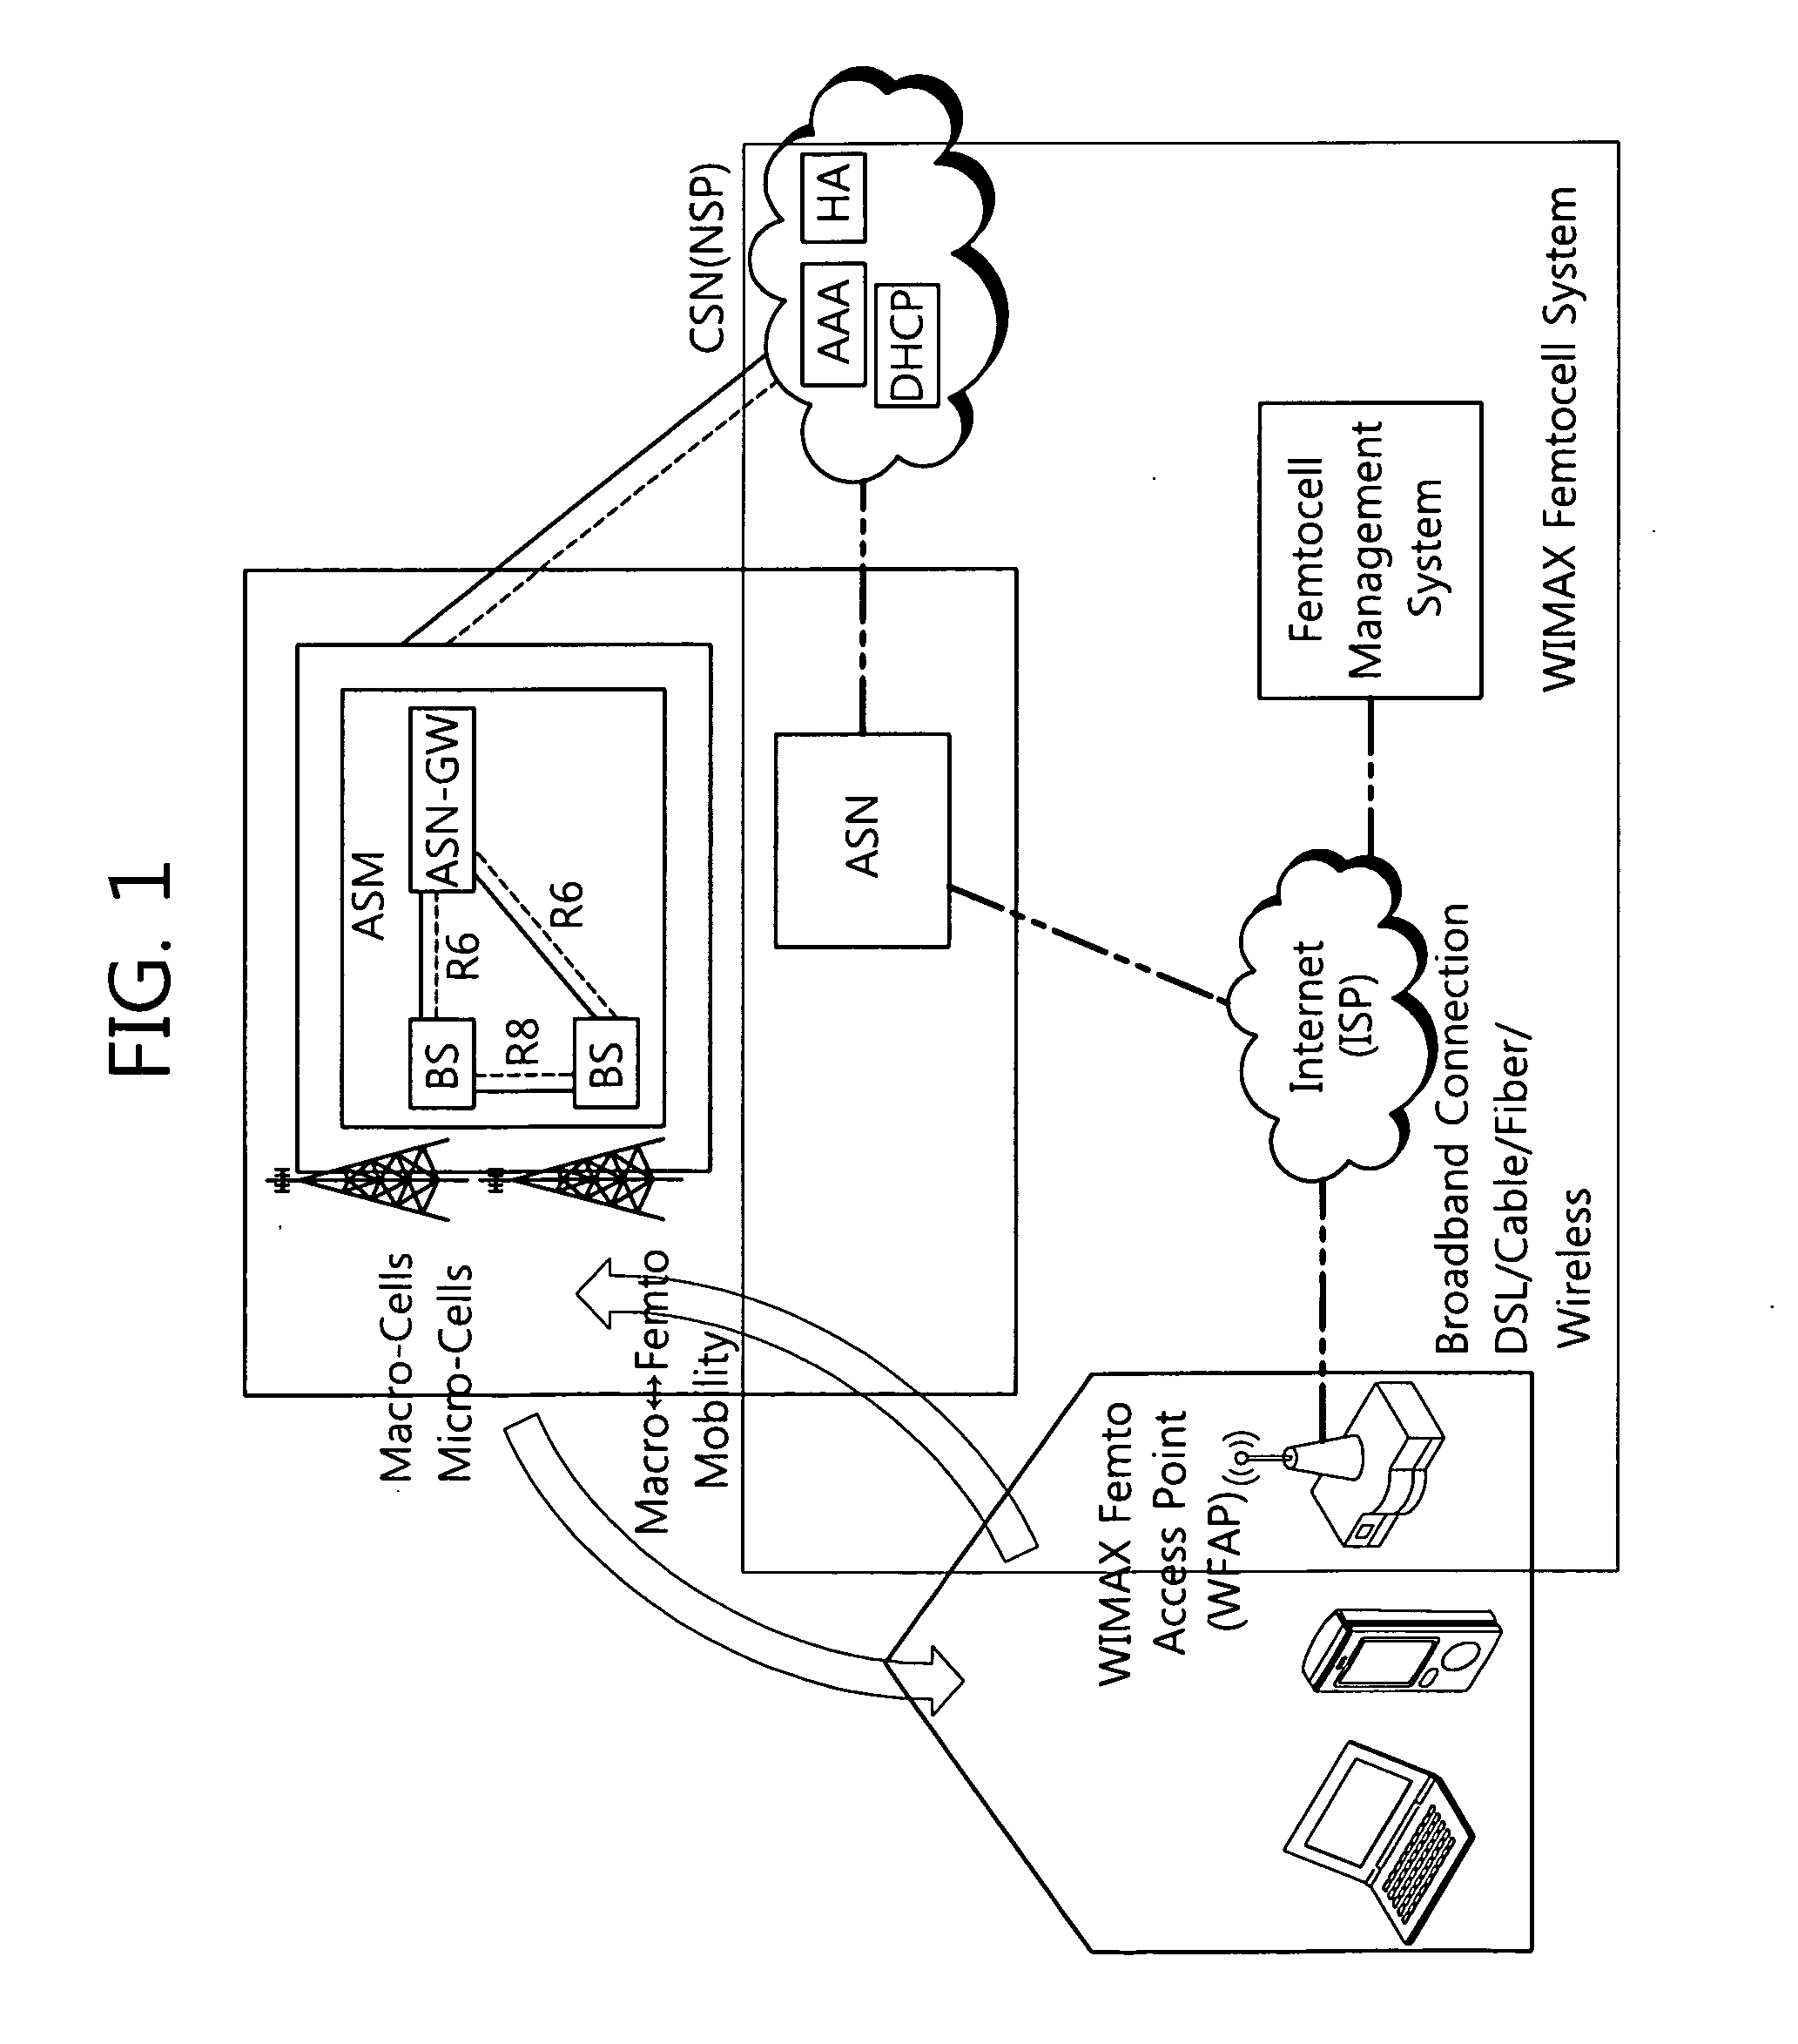 Method of transmitting data for reducing interference in hierarchical cell structure